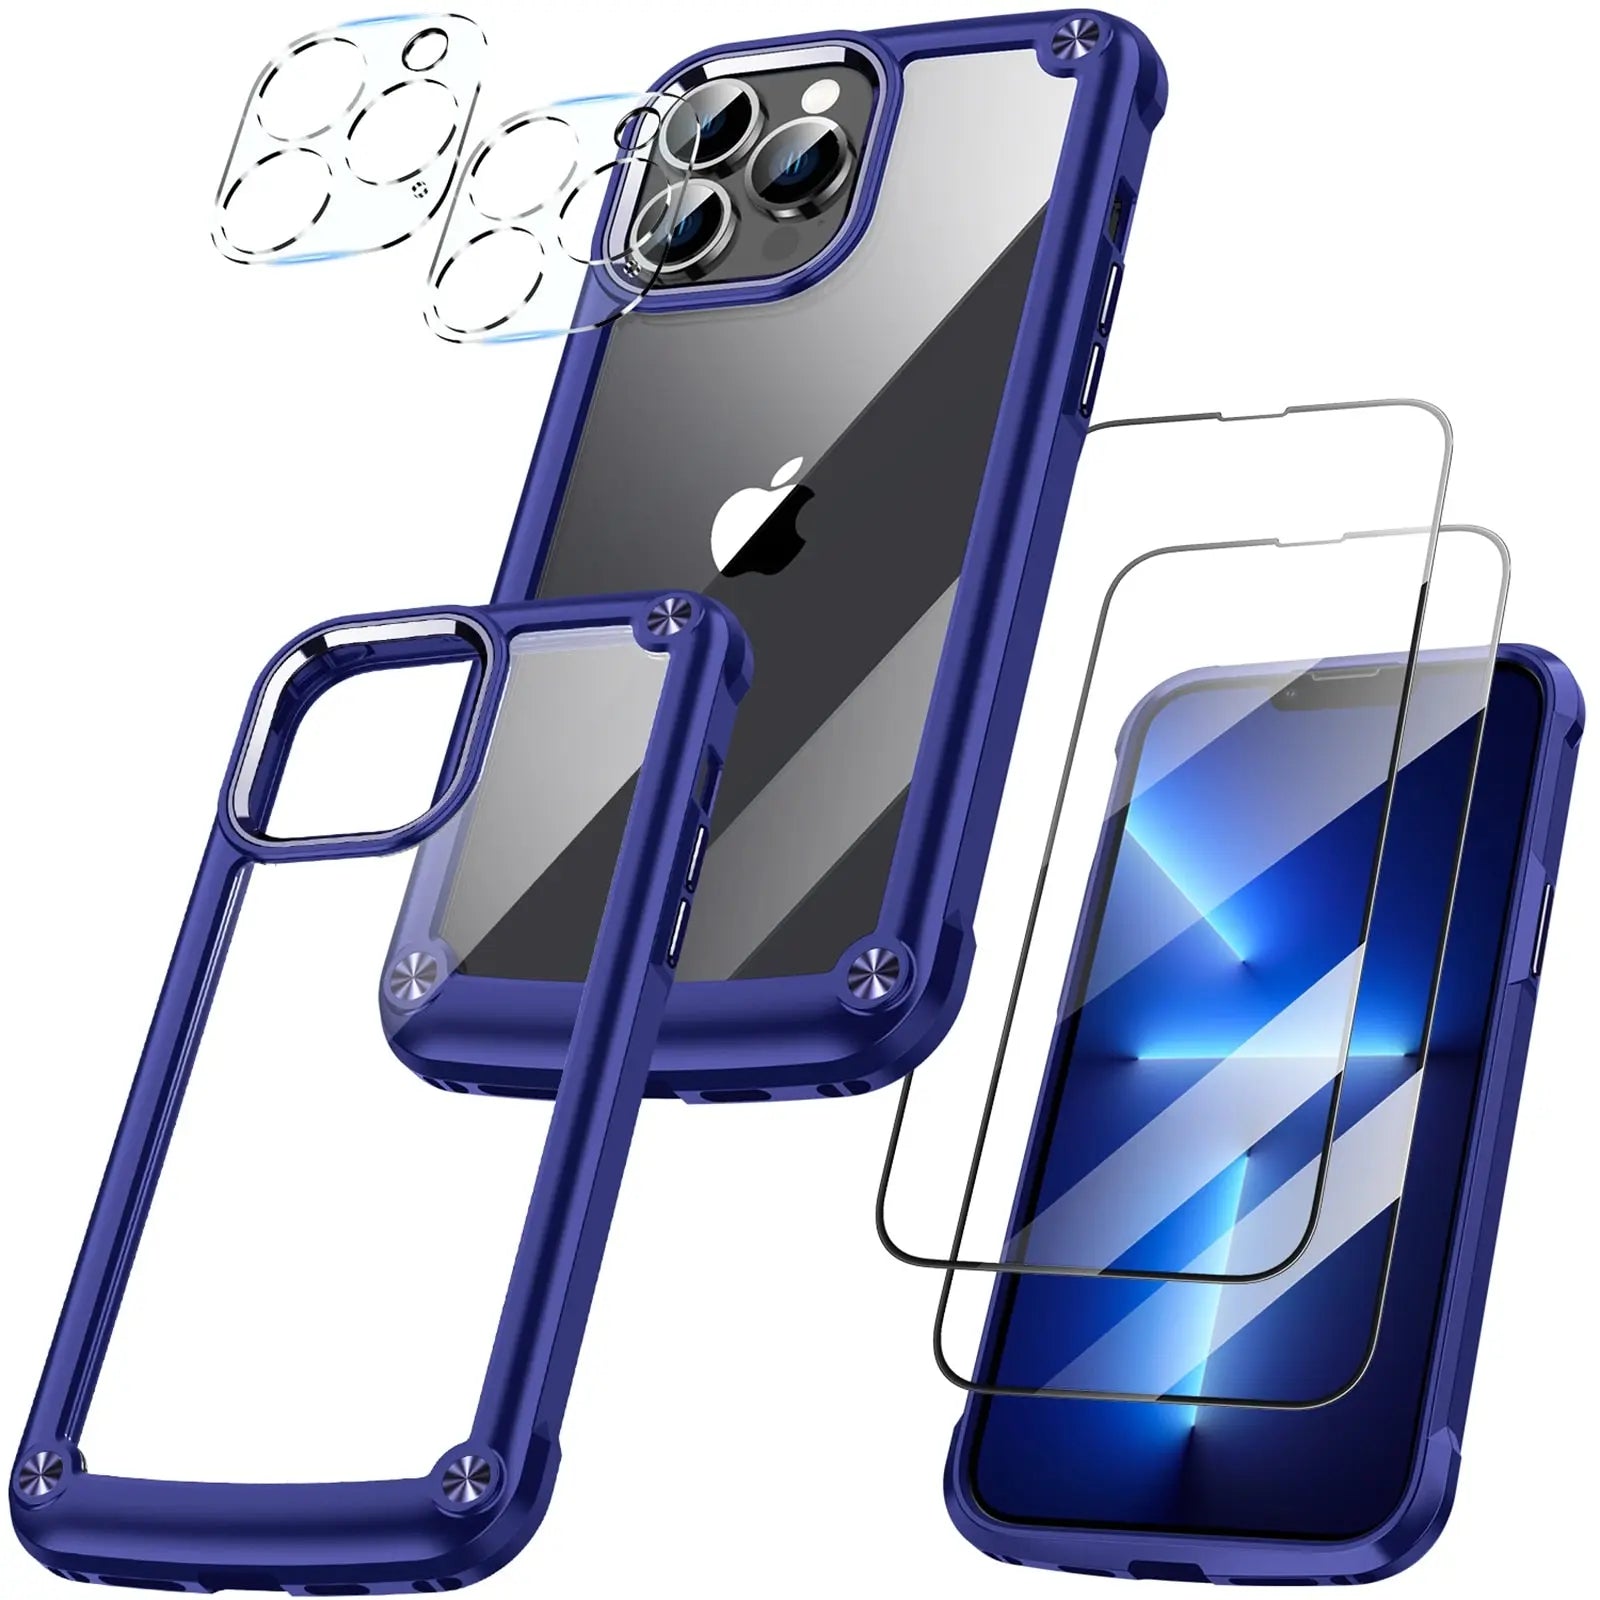 Pinnacle 5-in-1 Case Protection For iPhone 13 12 11 Pro Max XR - Pinnacle Luxuries